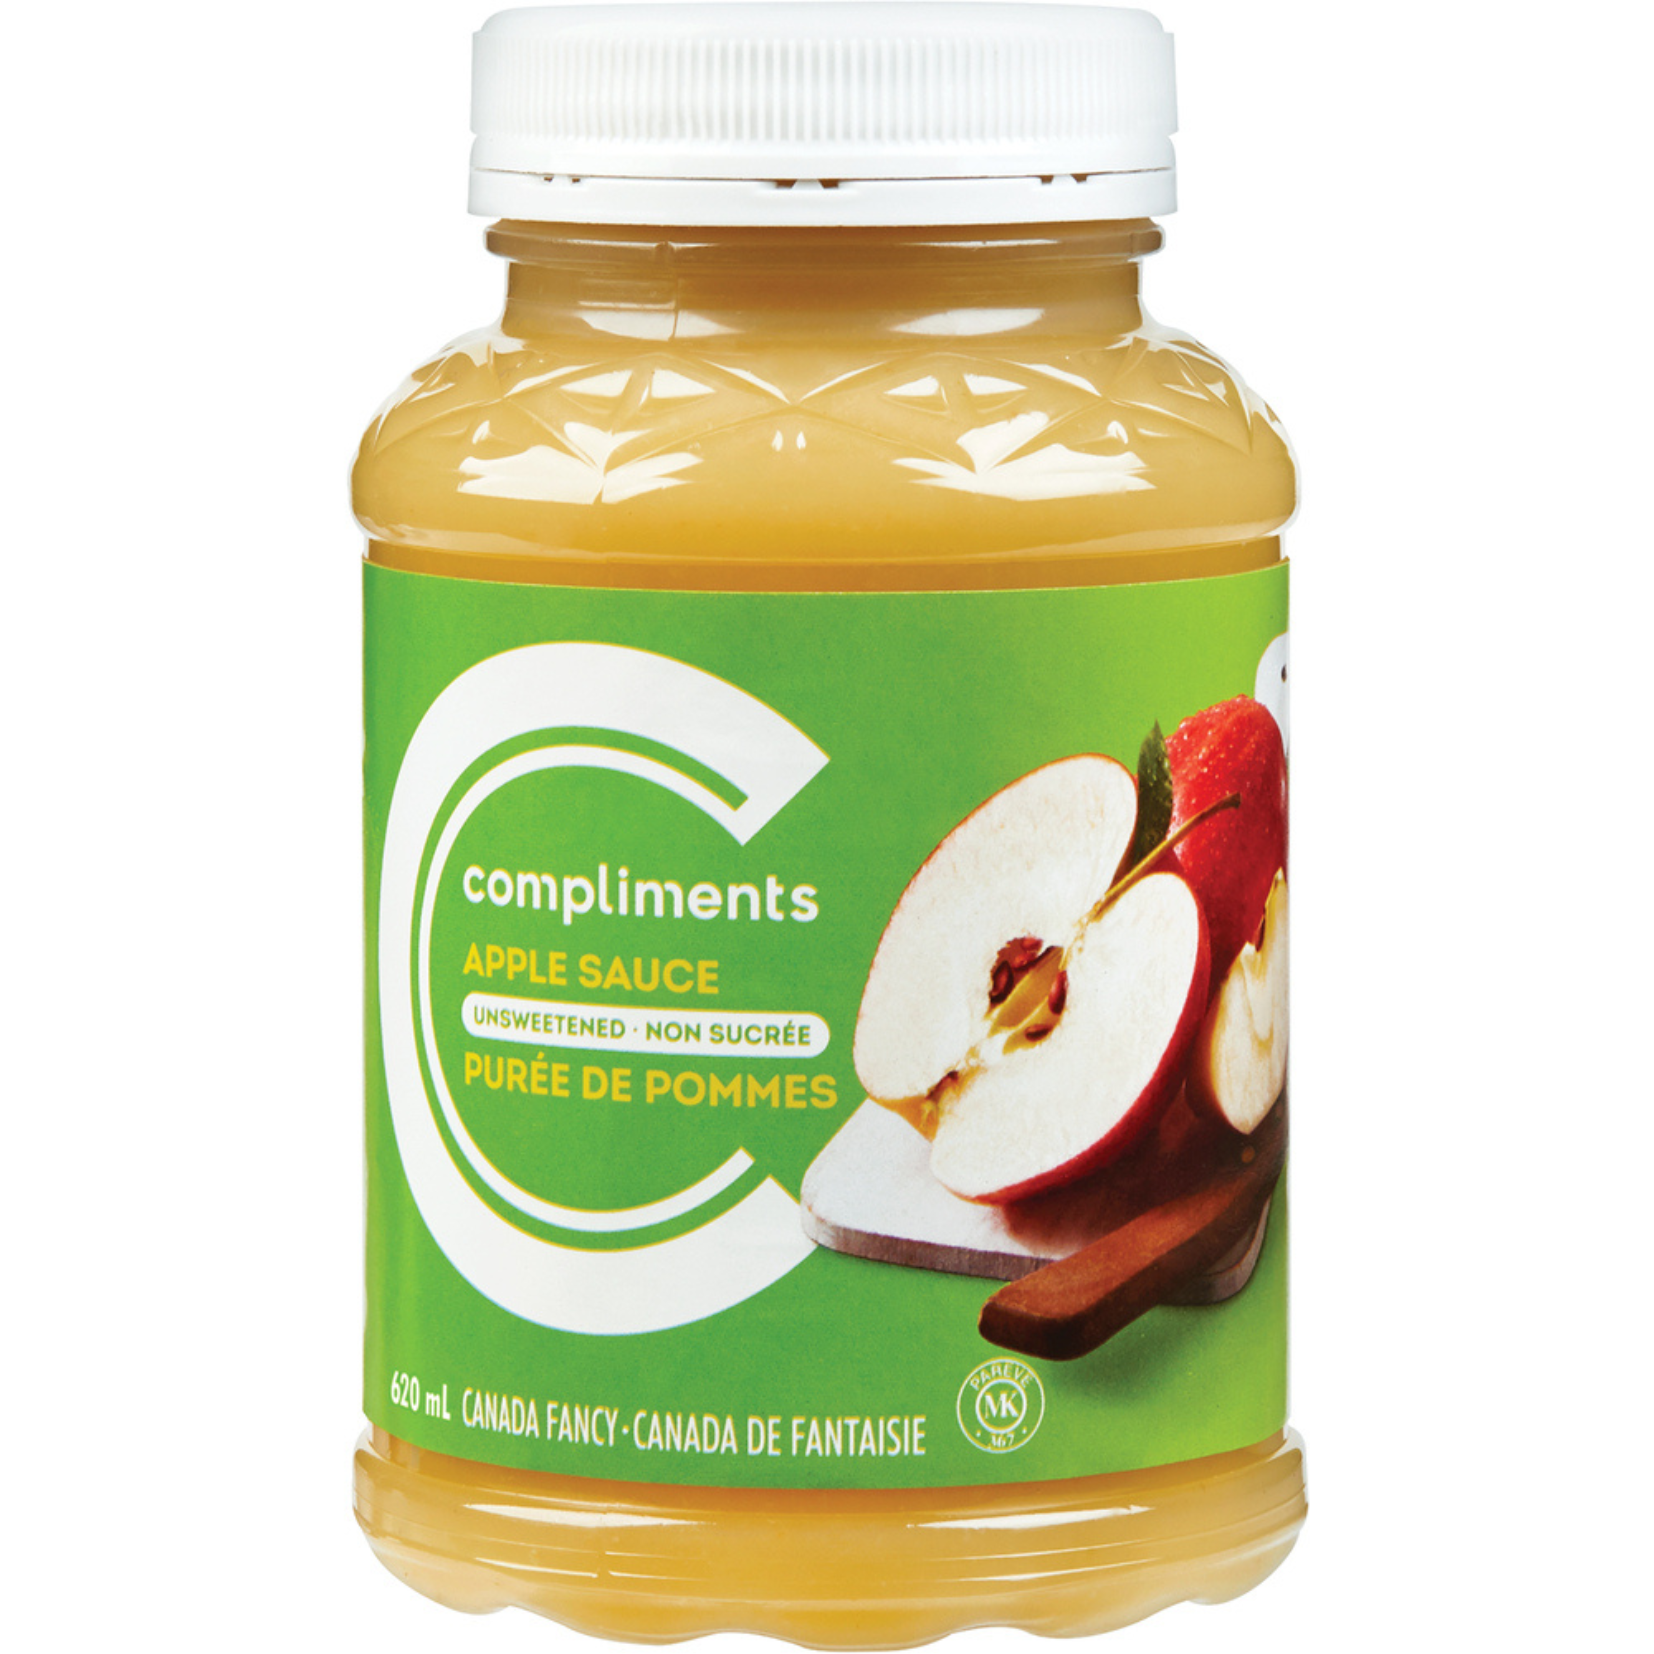 Compliments Unsweetened Apple Sauce 620ml